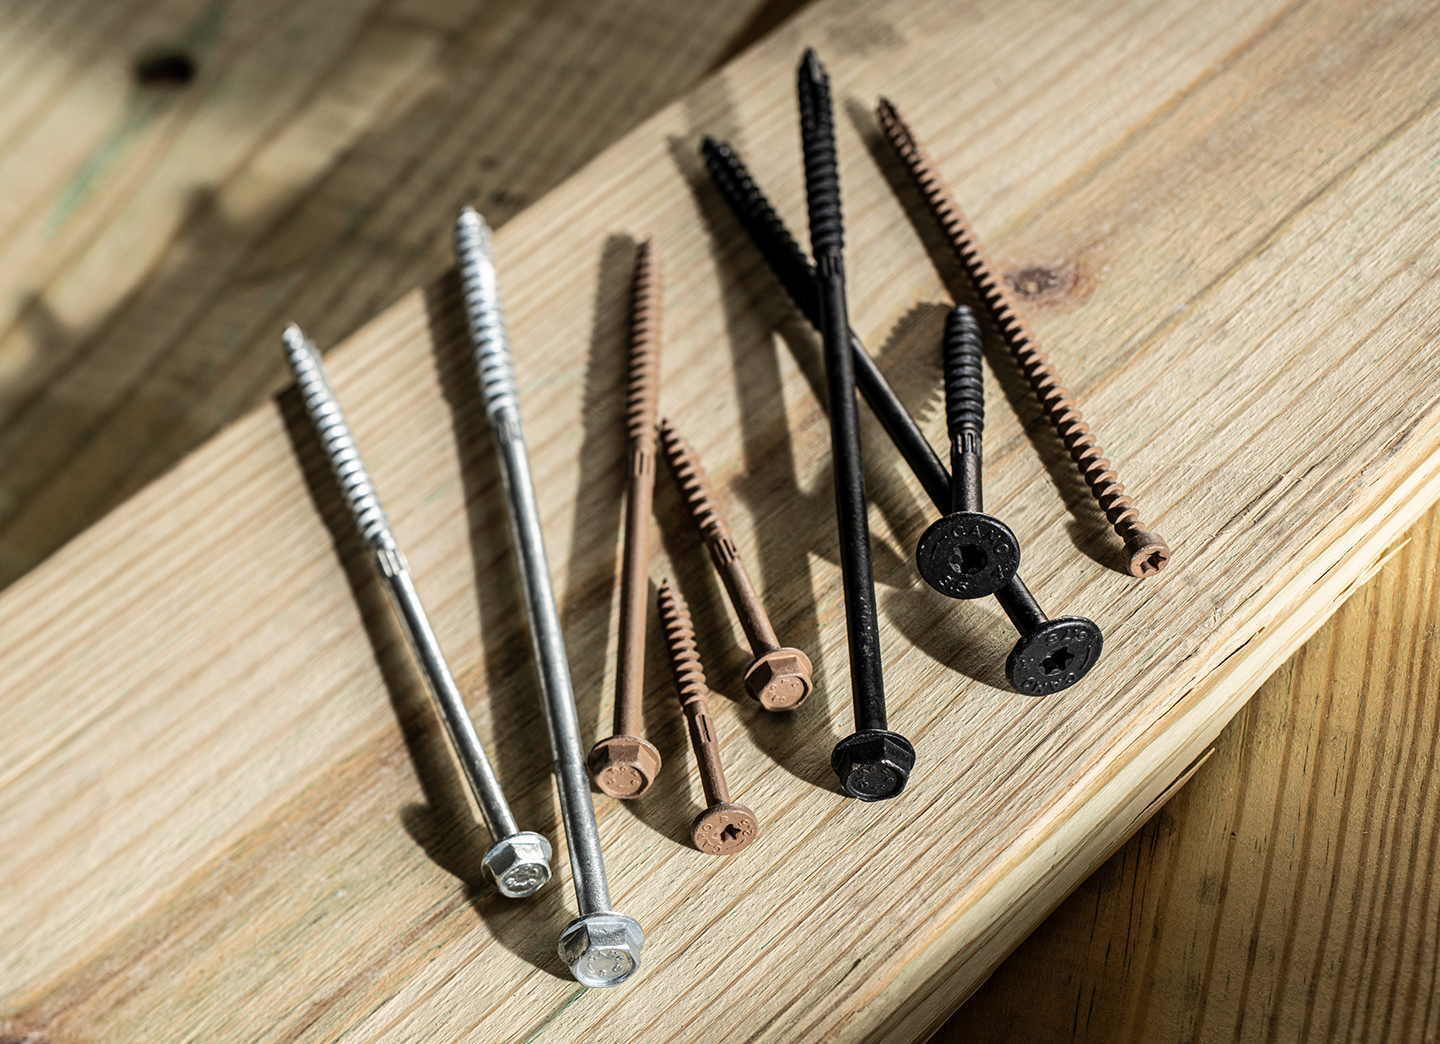 Construction Screws vs Deck Screws Whats the Difference